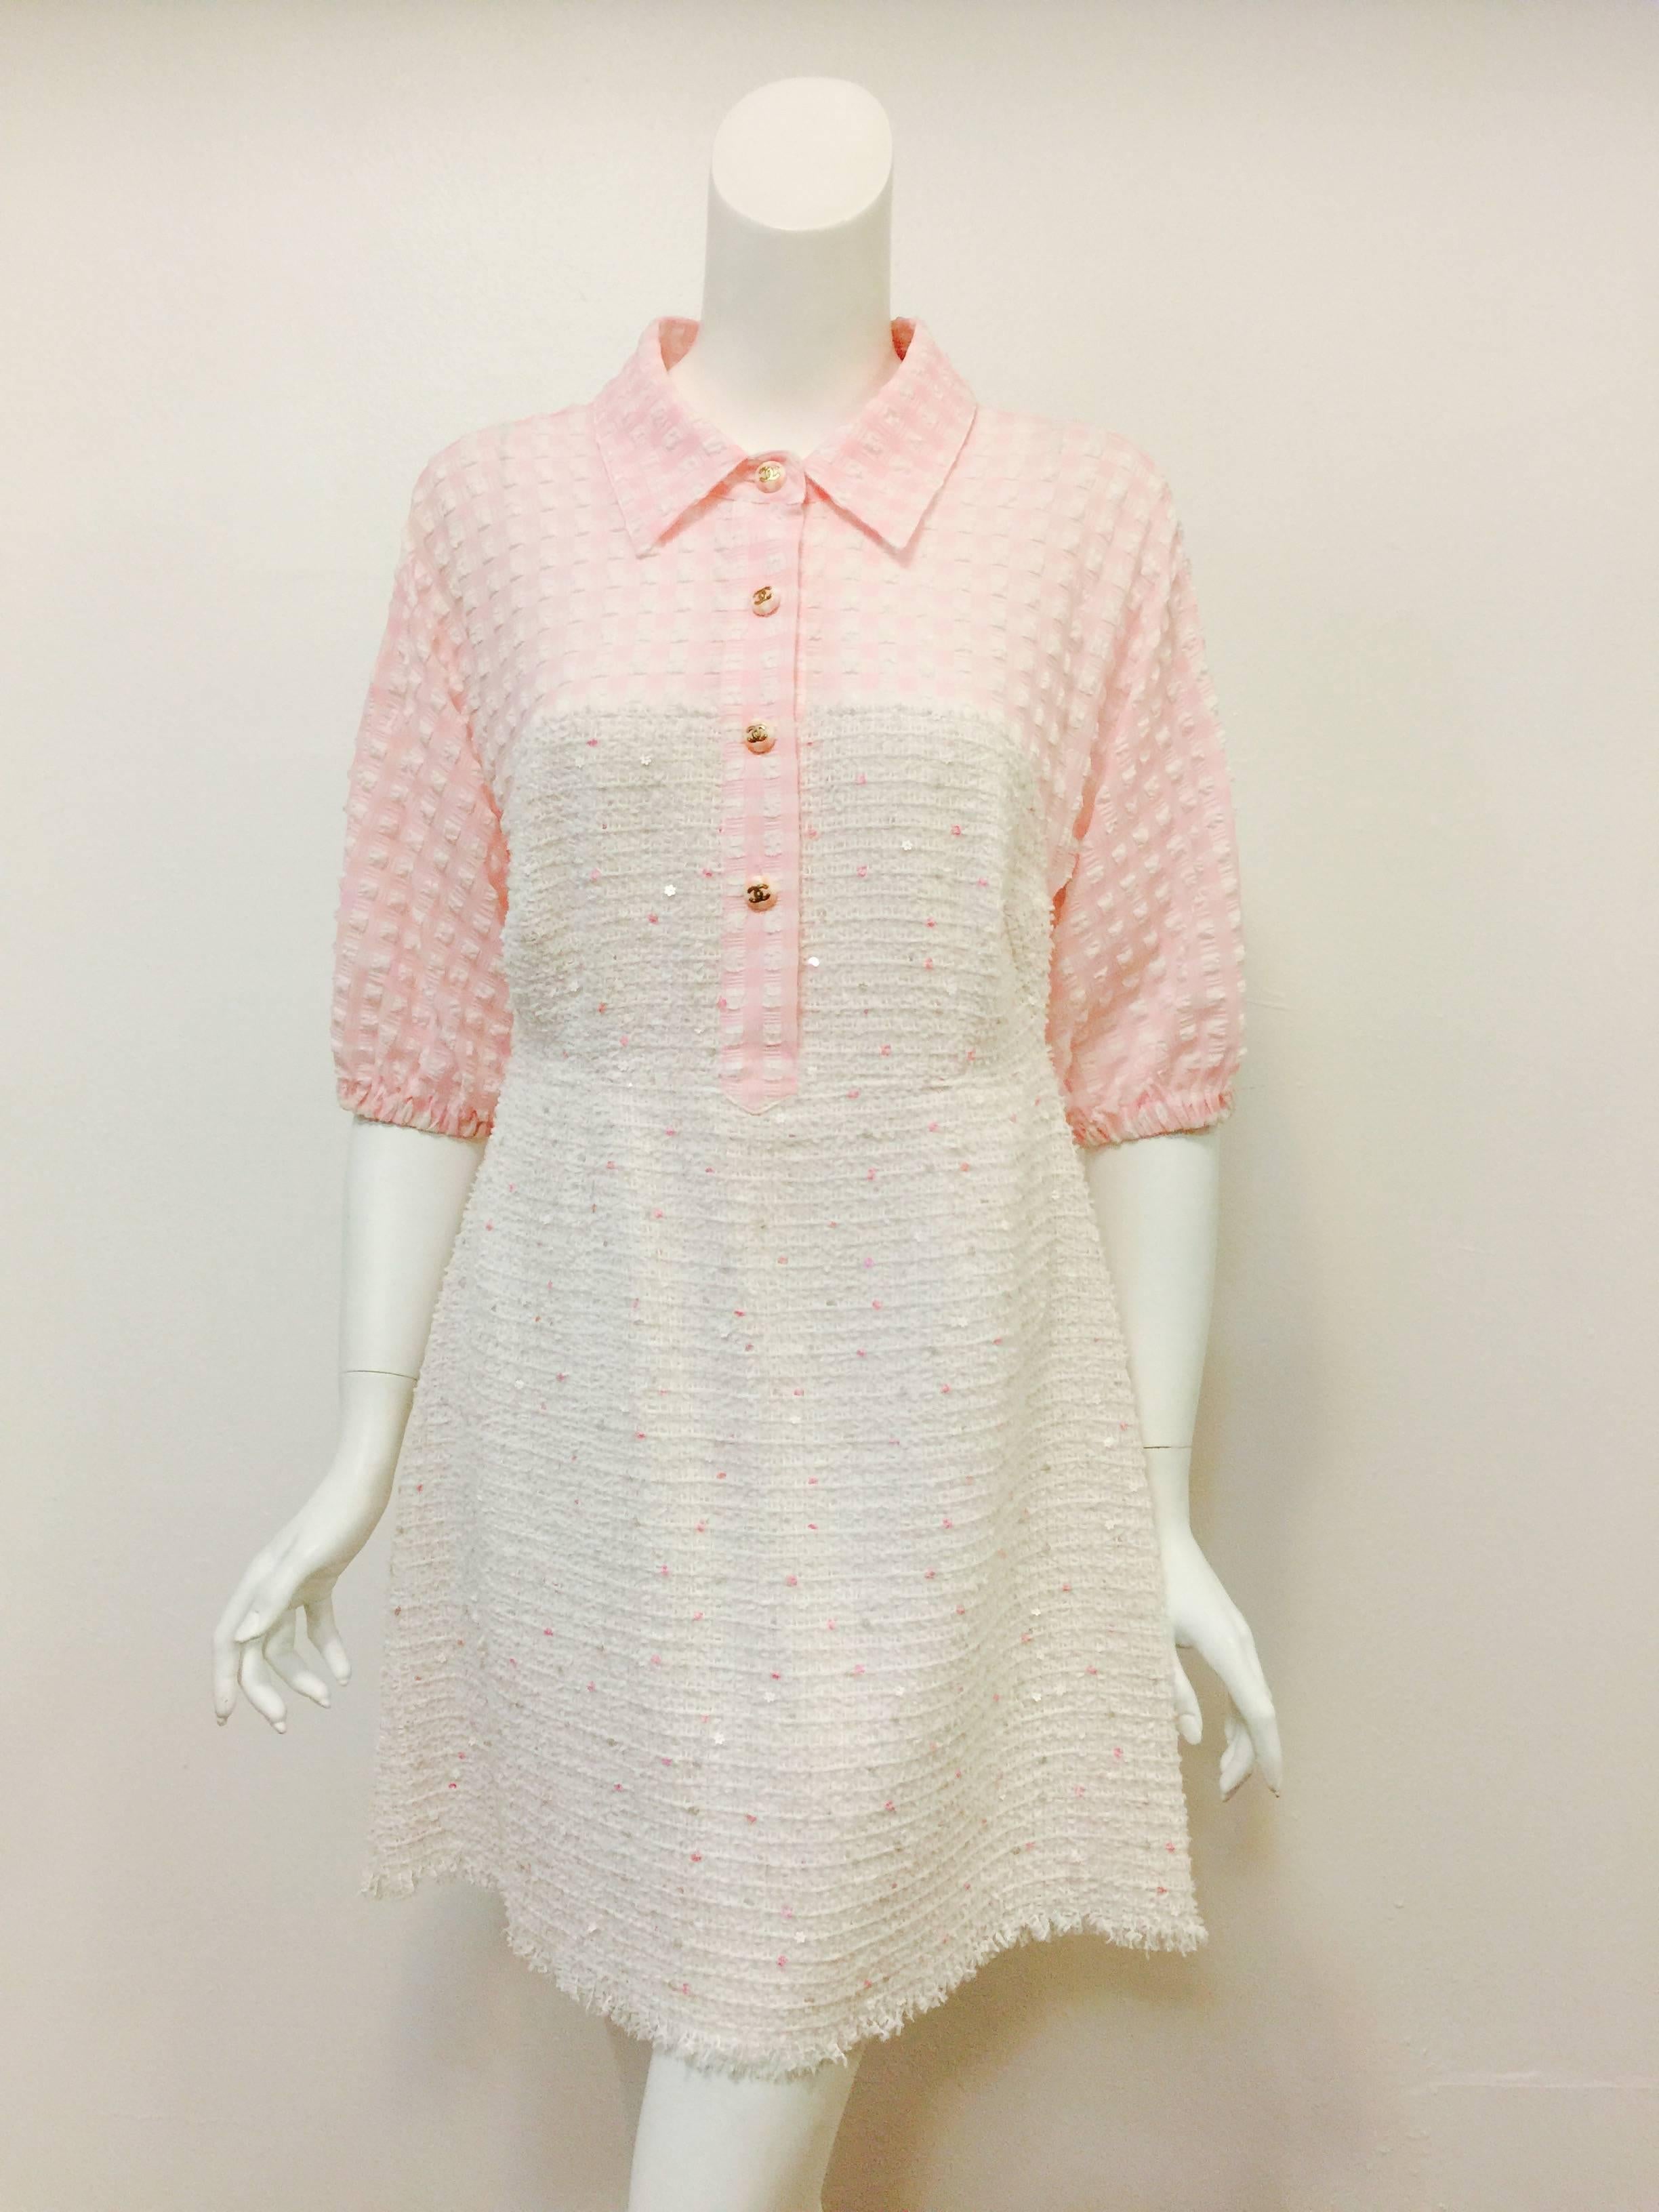 Chanel Tweed and Gingham Day Dress is whimsical and ultra-feminine!  Reminiscent of cotton candy, dress is rendered in pink and white tweed dotted with pink pink and white sequins.  Upper bodice, back and raglan pouf sleeves are crafted from a